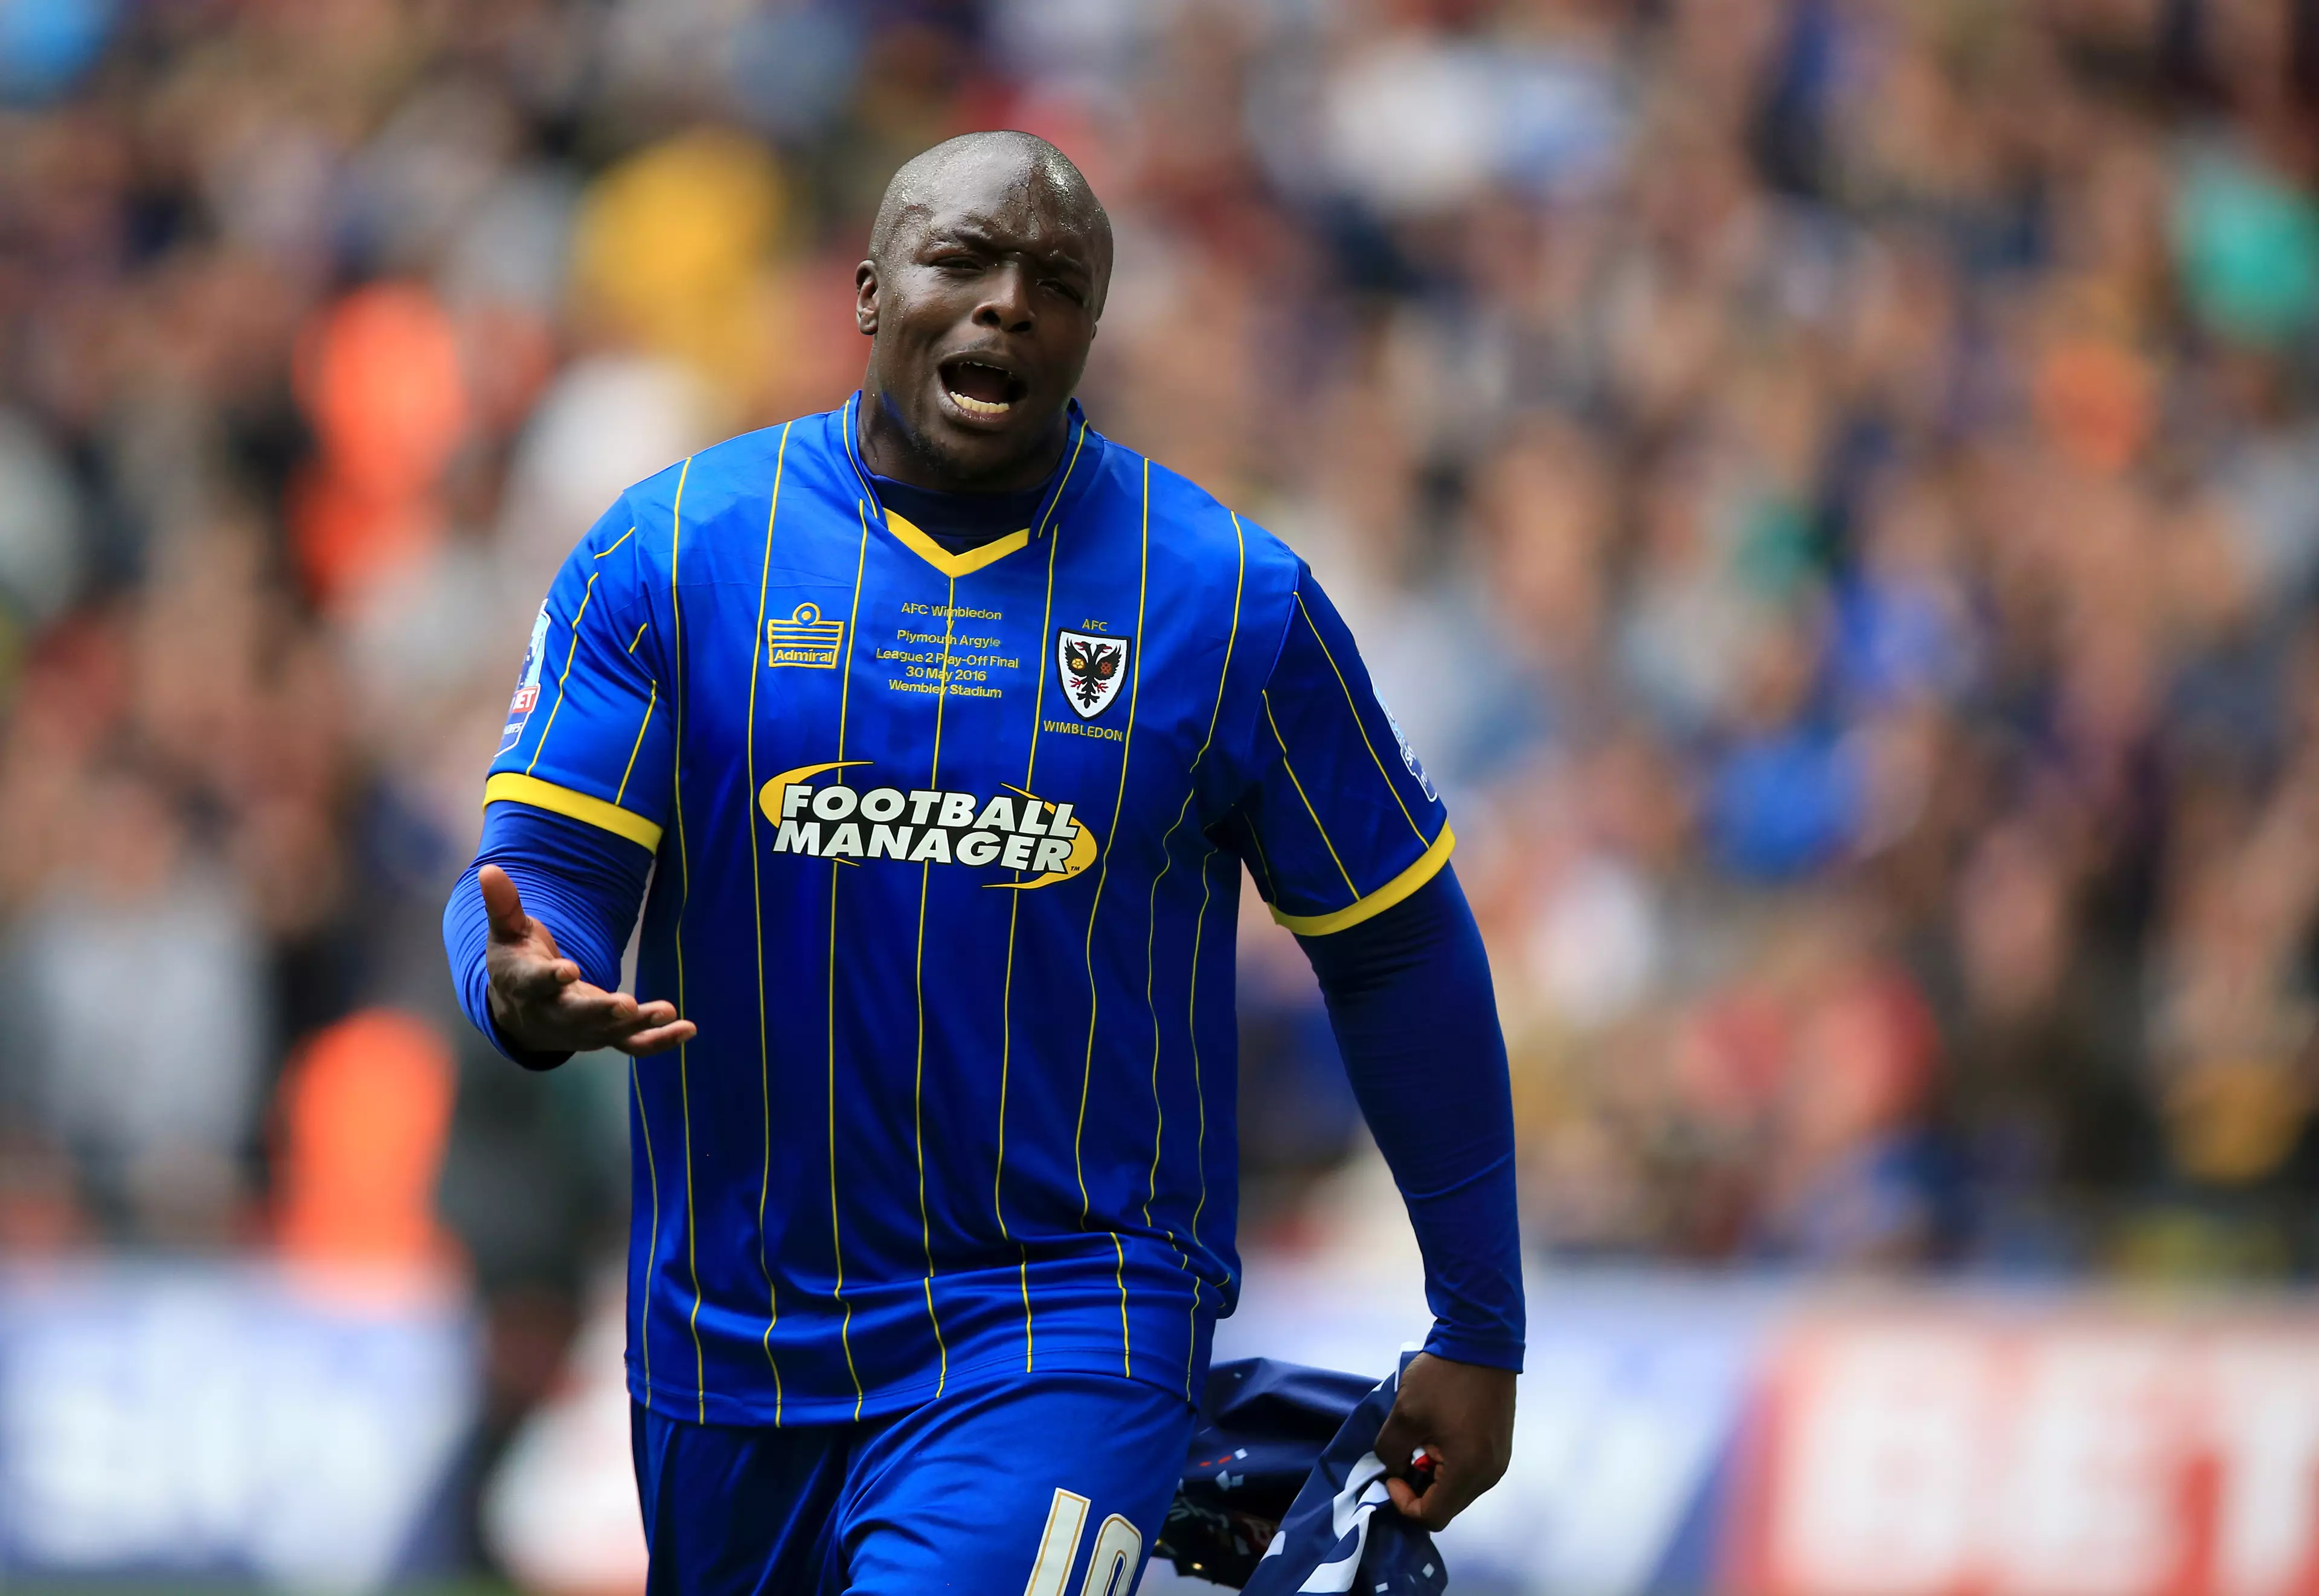 A Look At The Evolution Of Adebayo Akinfenwa On FIFA Through The Years